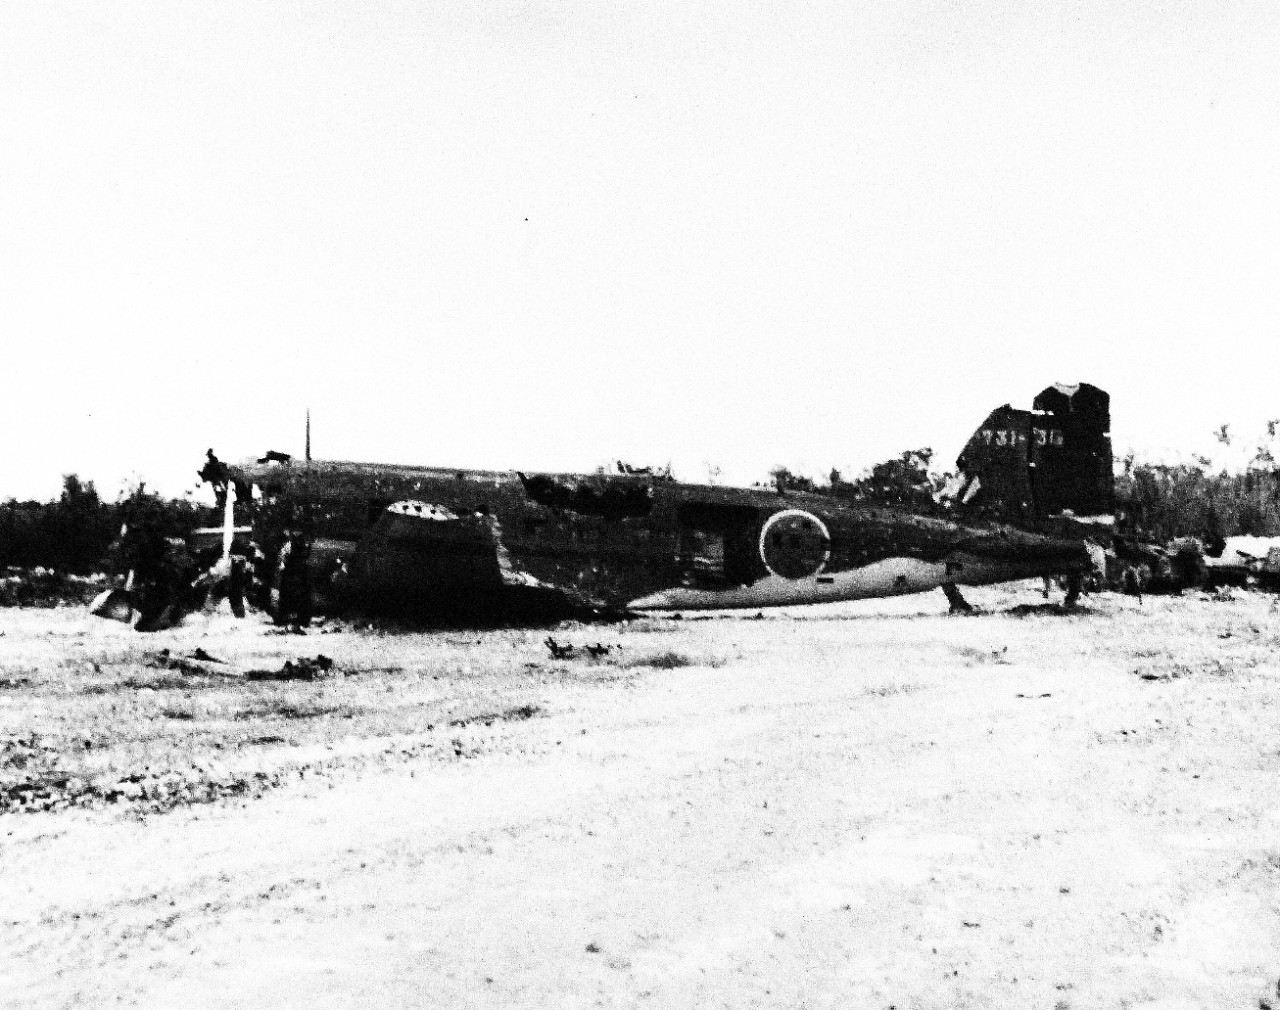 80-G-335011:   Okinawa Campaign, April-June 1945.  Wrecked Japanese transport Nakajima L2D, aircraft nicknamed “Tabby” on Okinawa, Ryukyu Islands.  Photograph received July 19, 1945.   Note, original mount card is extremely curved.  Official U.S. Navy Photograph, now in the collections of the National Archives.    (2015/4/21).  